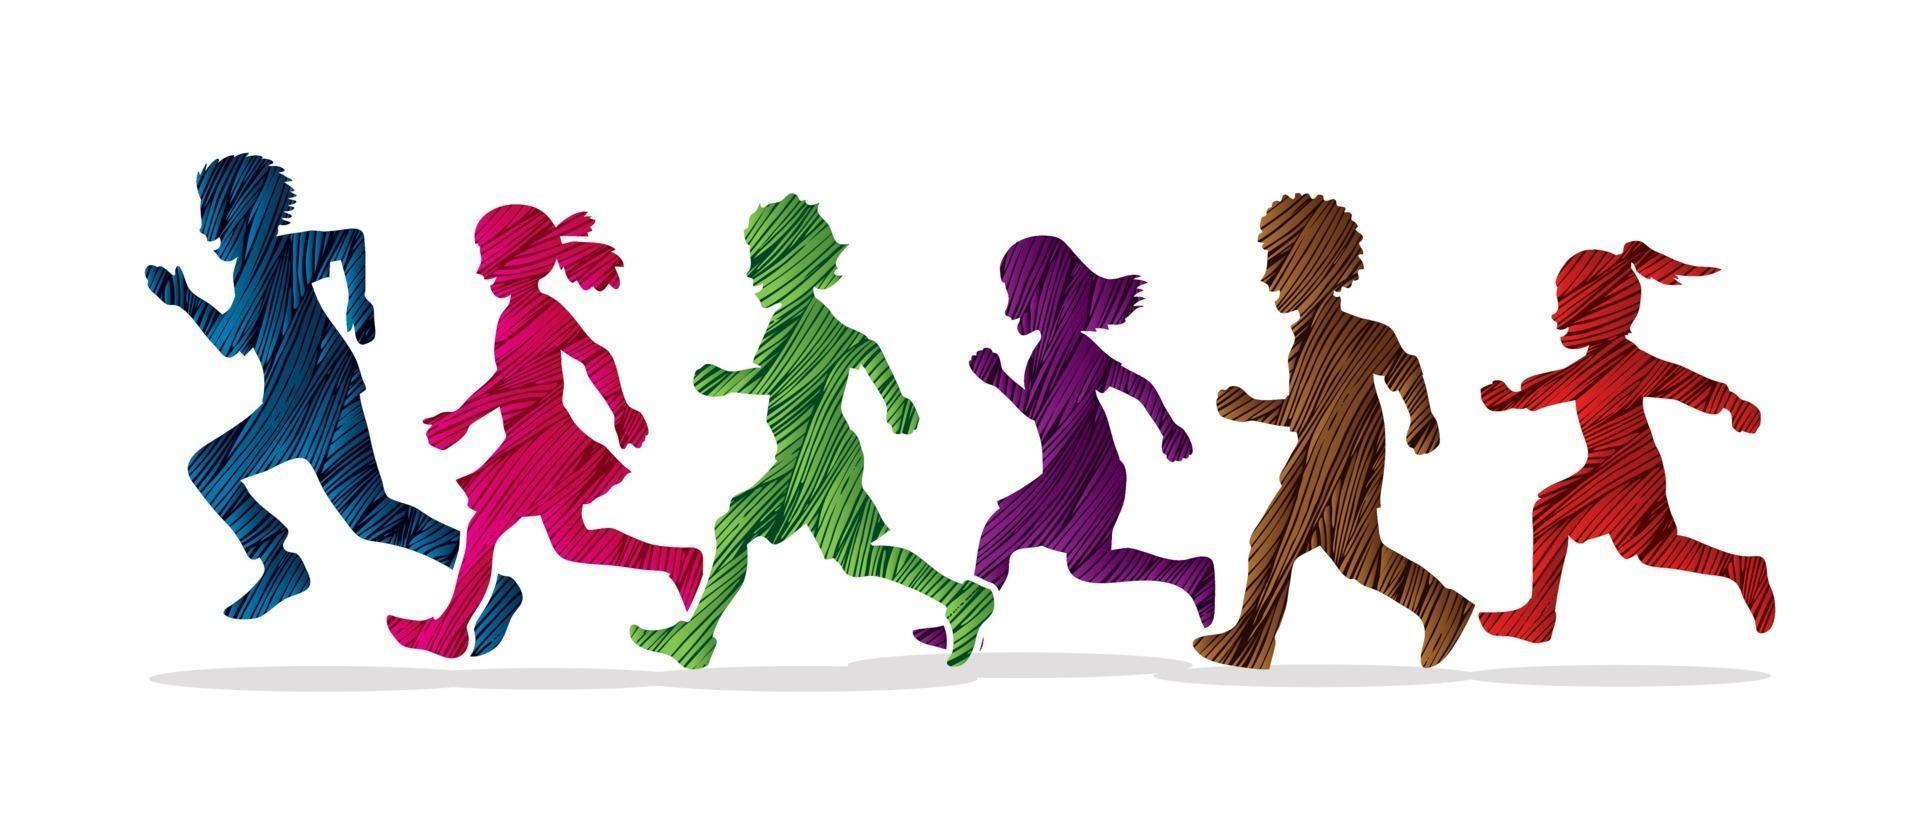 Children Running and Playing Together vector